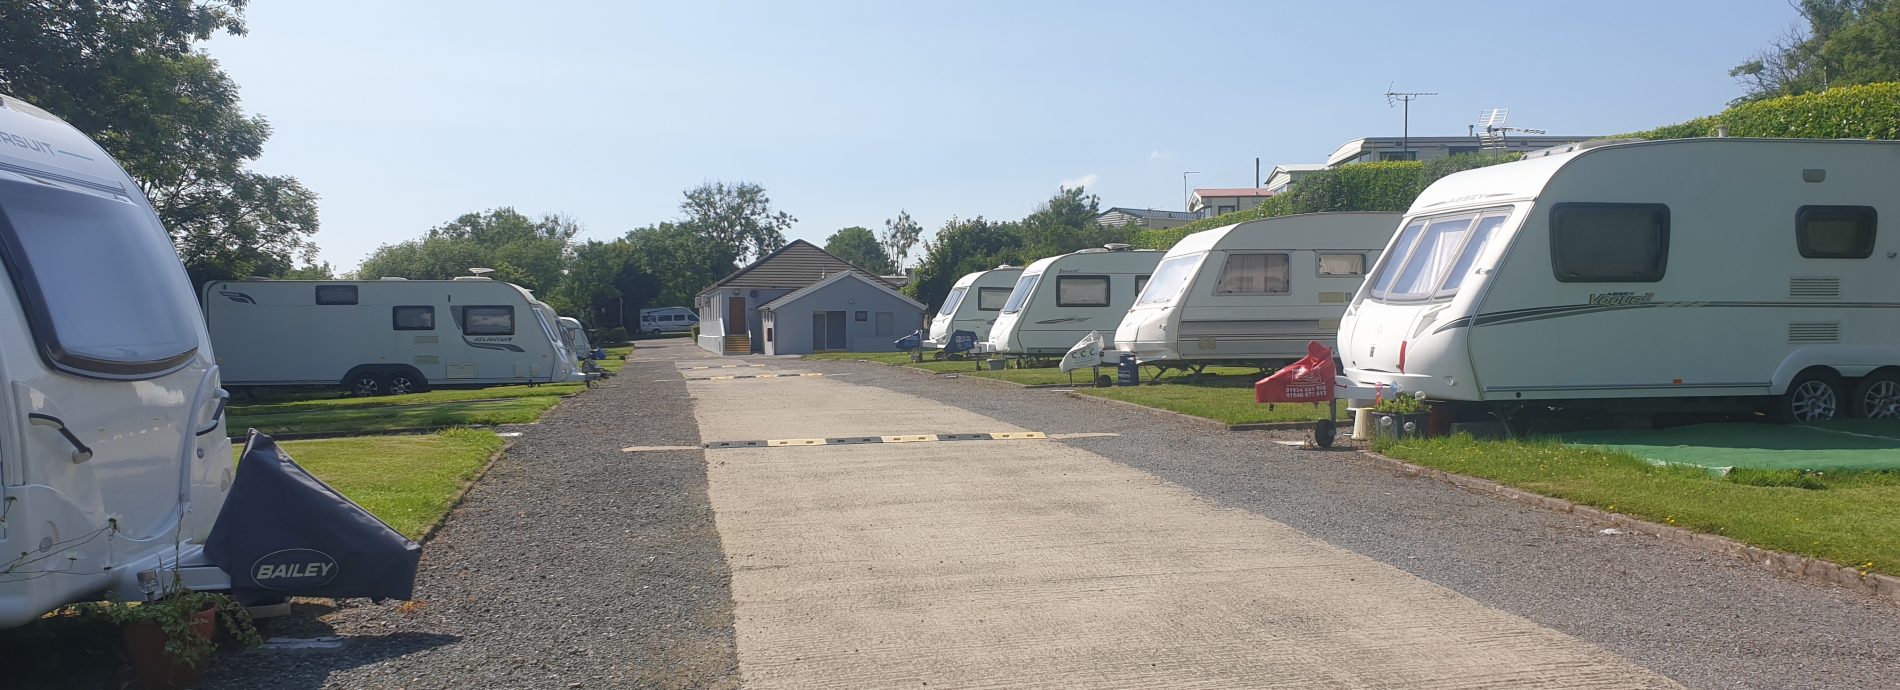 https://www.redfordcaravanpark.co.uk/wp-content/uploads/2020/07/included-in-the-touring-scaled-aspect-ratio-1900-690.jpg